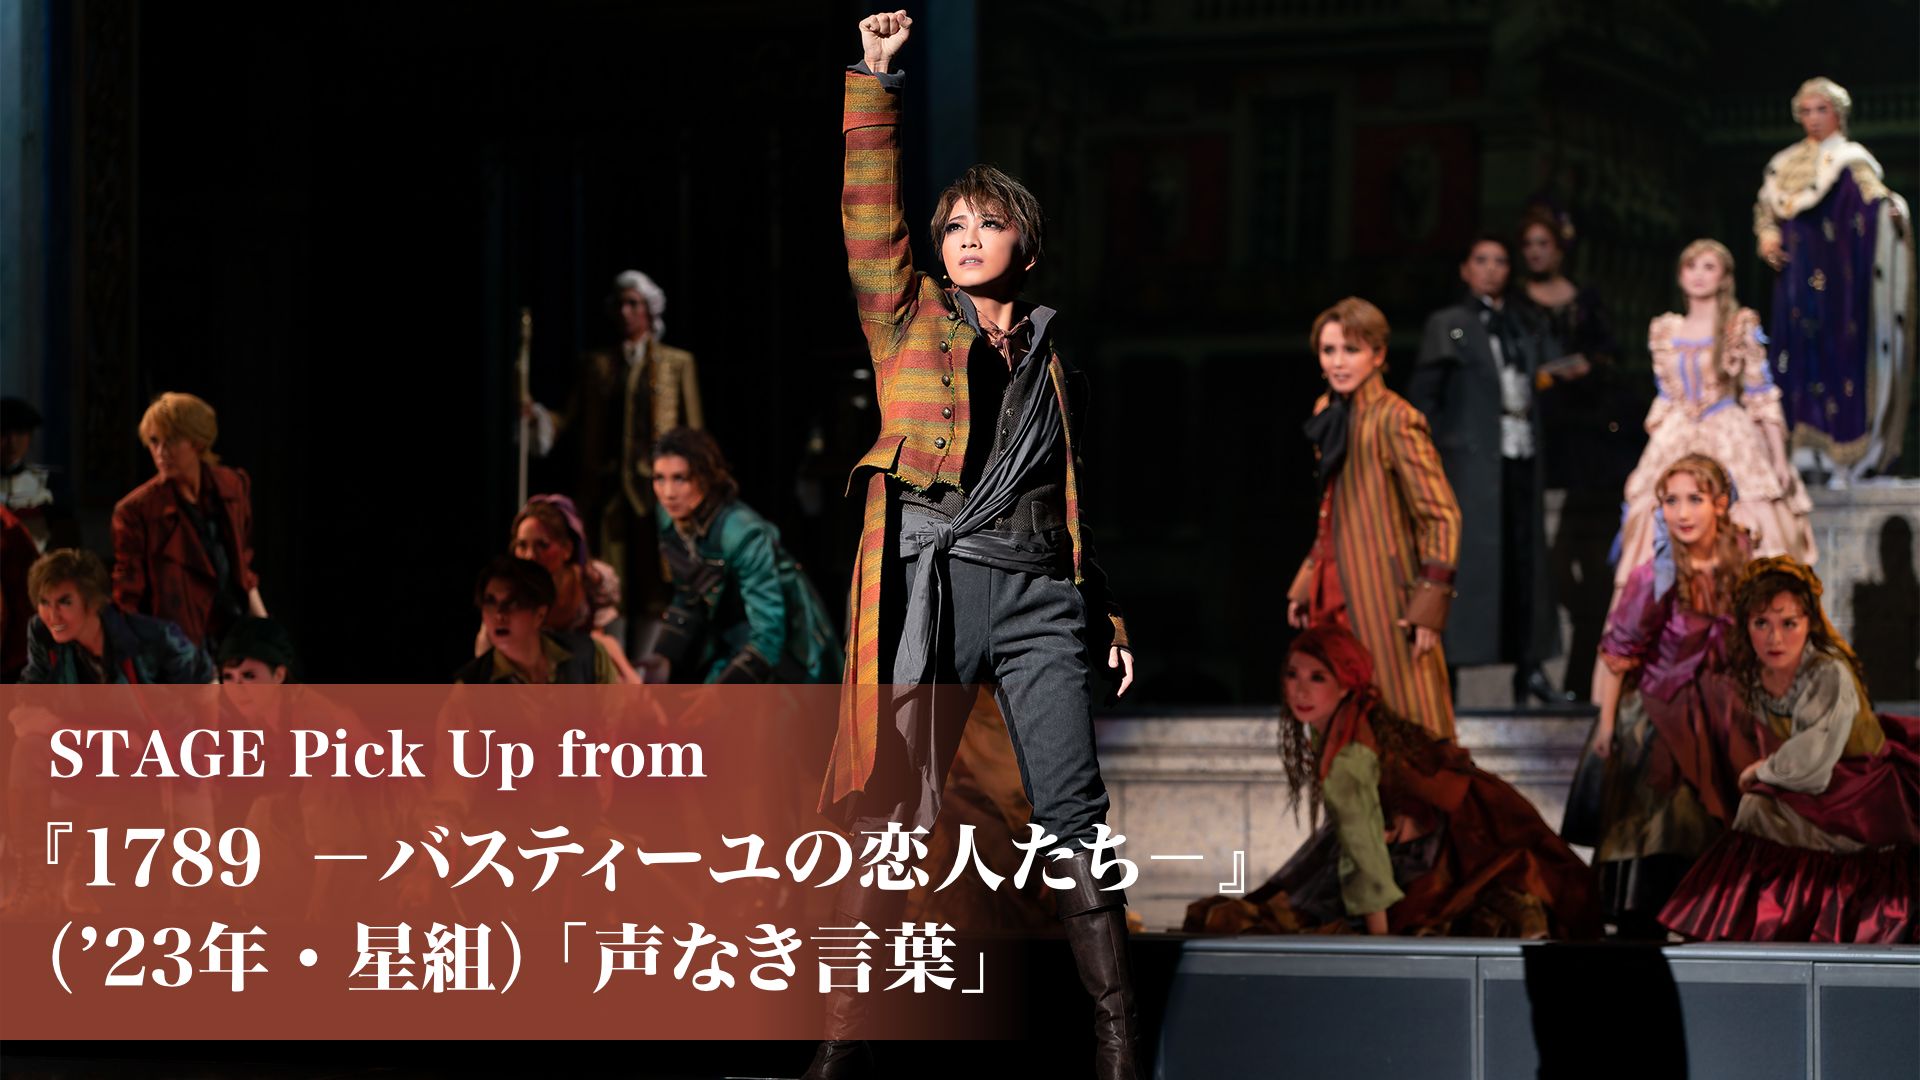 STAGE Pick Up from『1789 -バスティーユの恋人たち-』(’23年・星組)「声なき言葉」